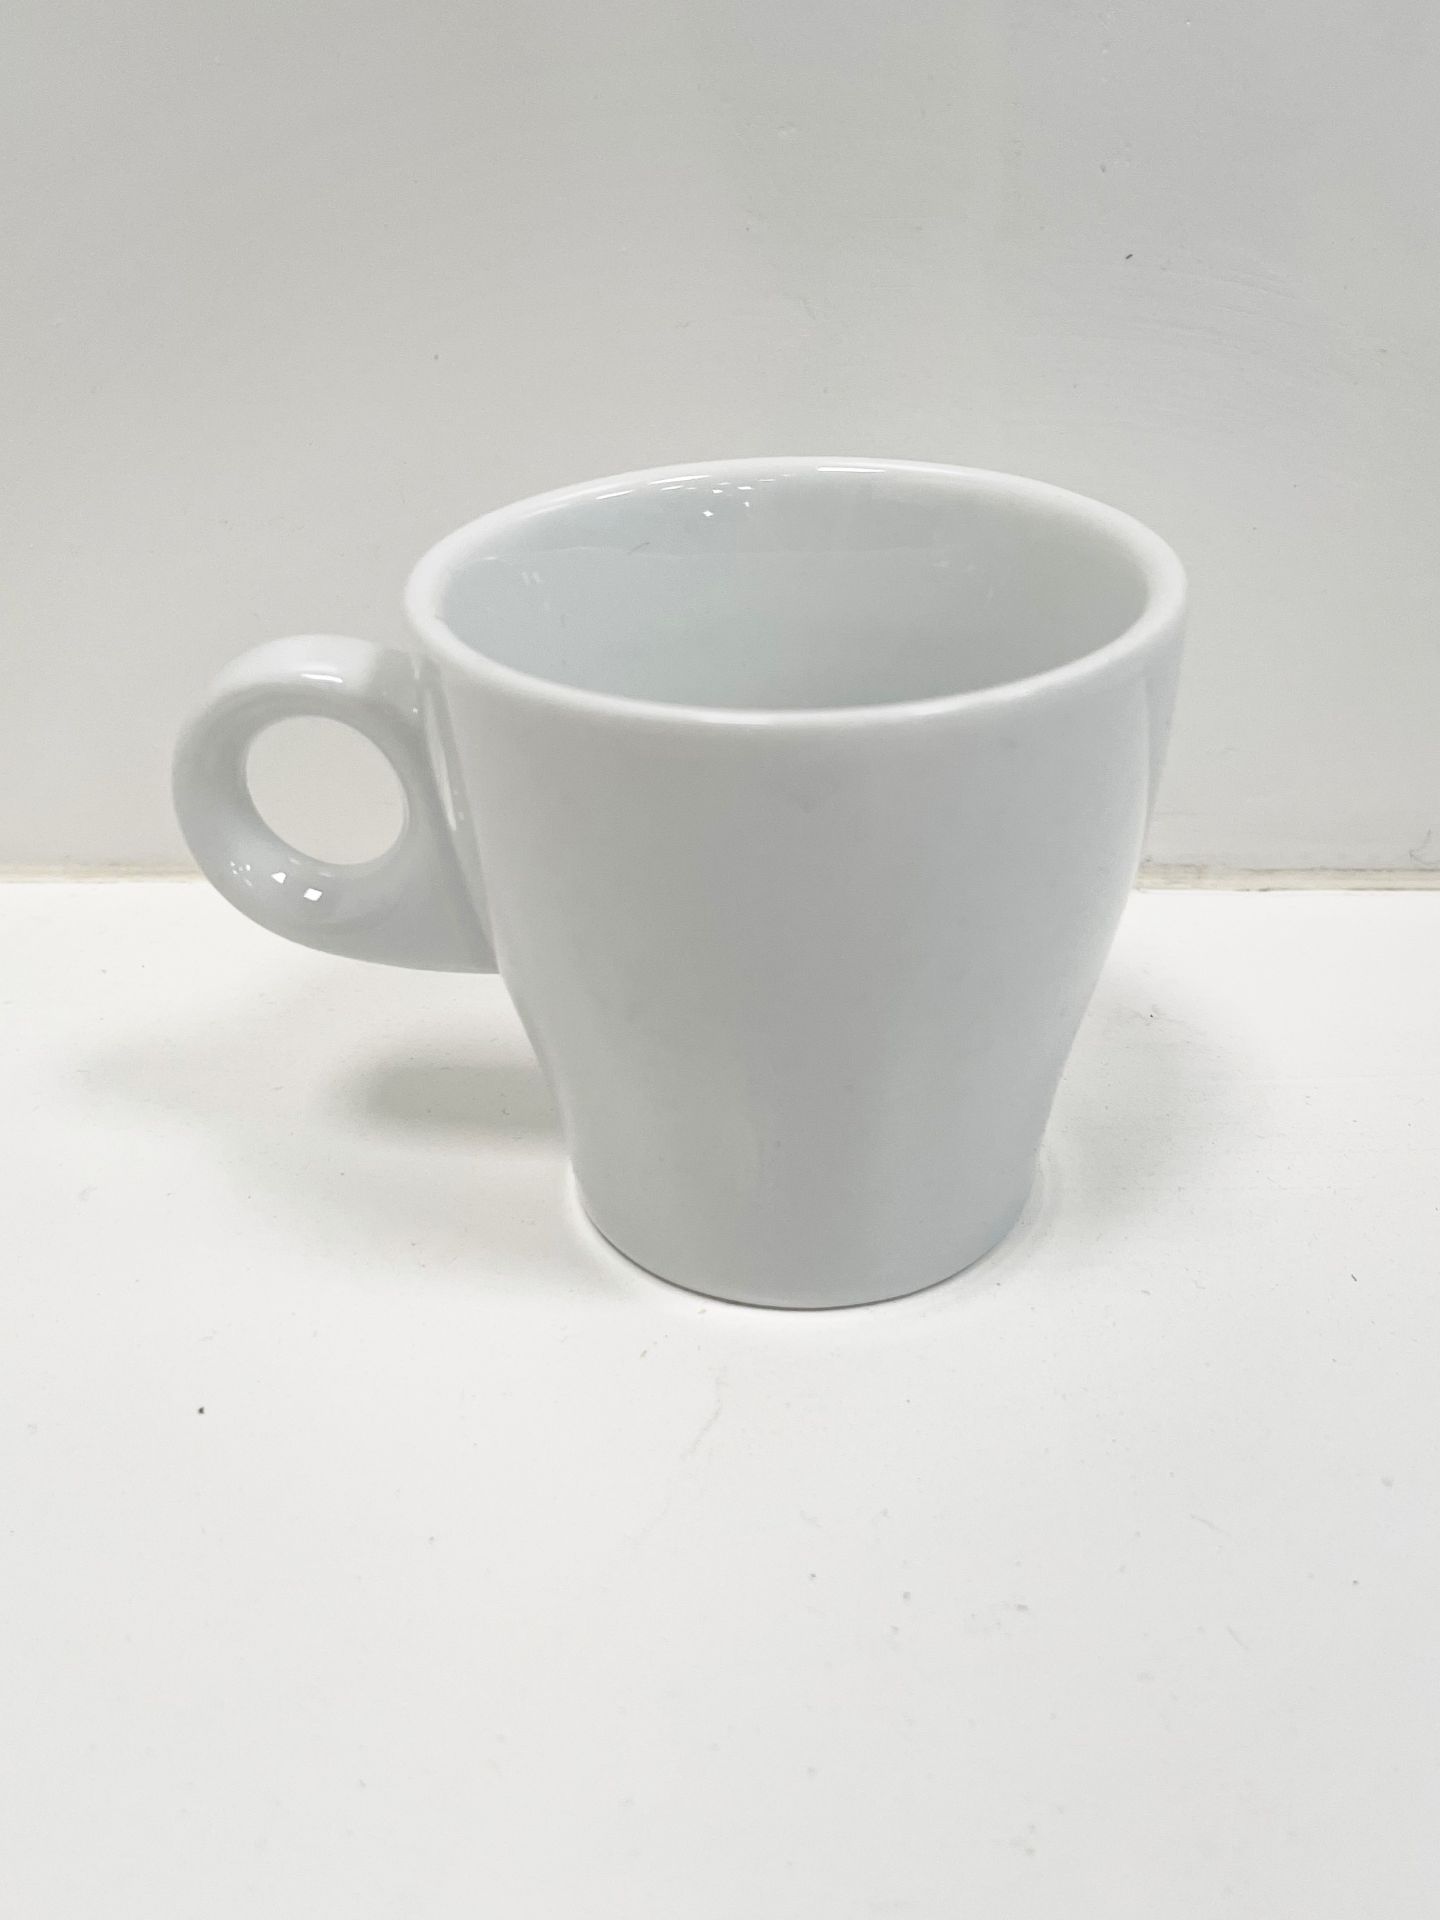 Tall Cup & Saucer. 2x15 - Image 2 of 5